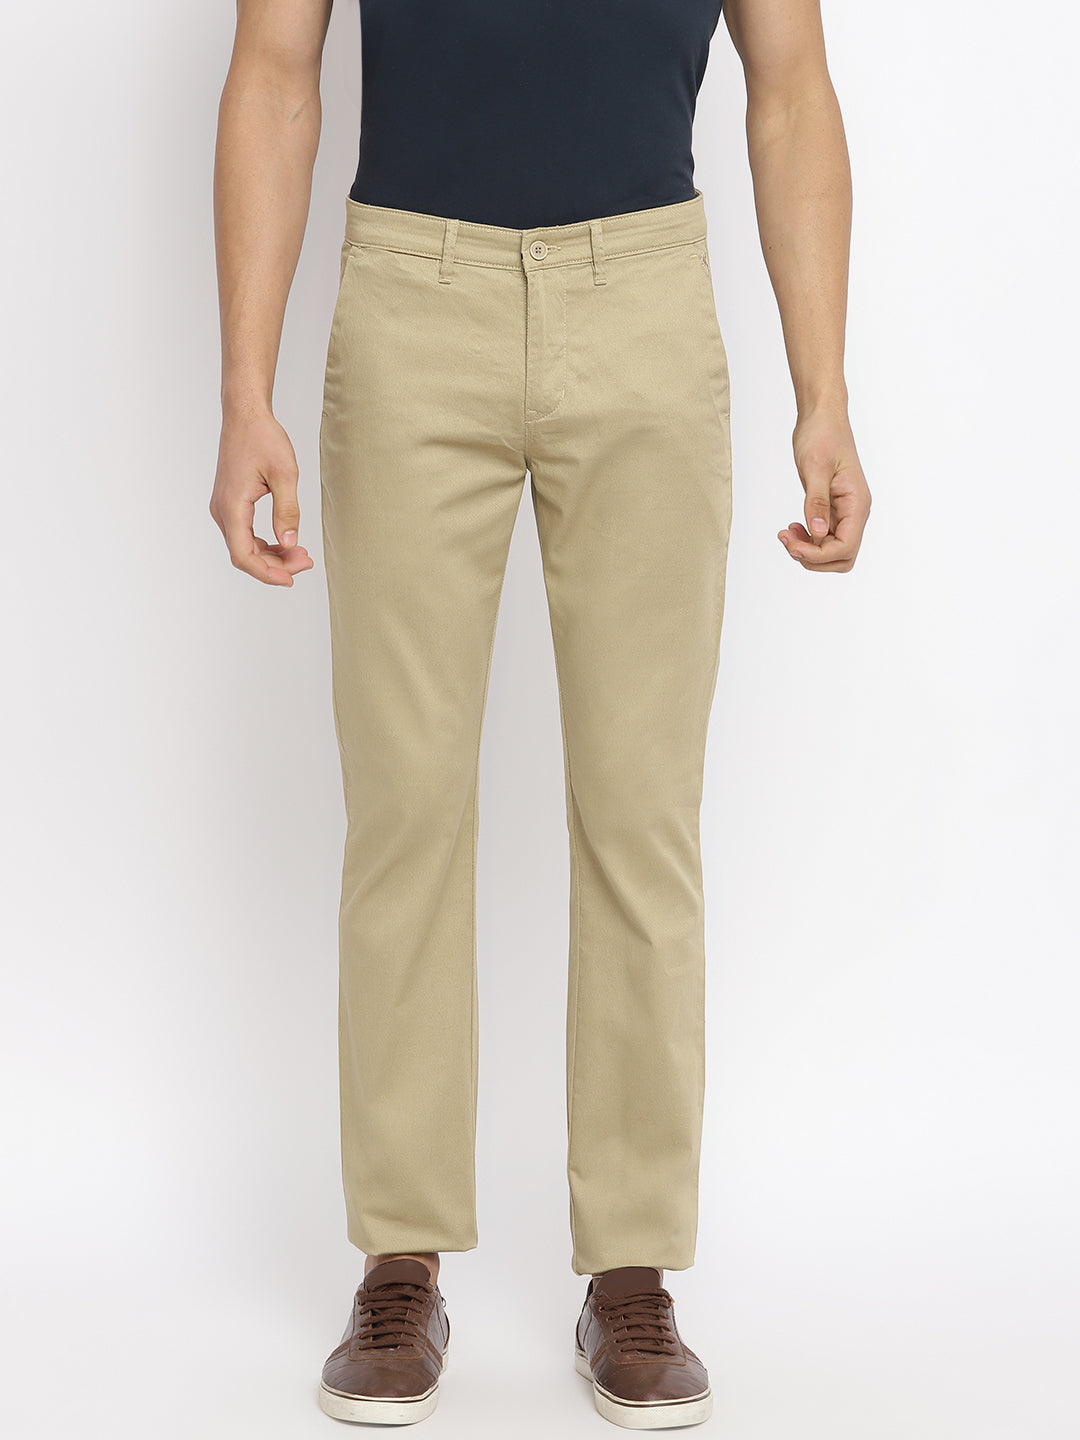 Buy Cantabil Men Camel Casual Trousers online